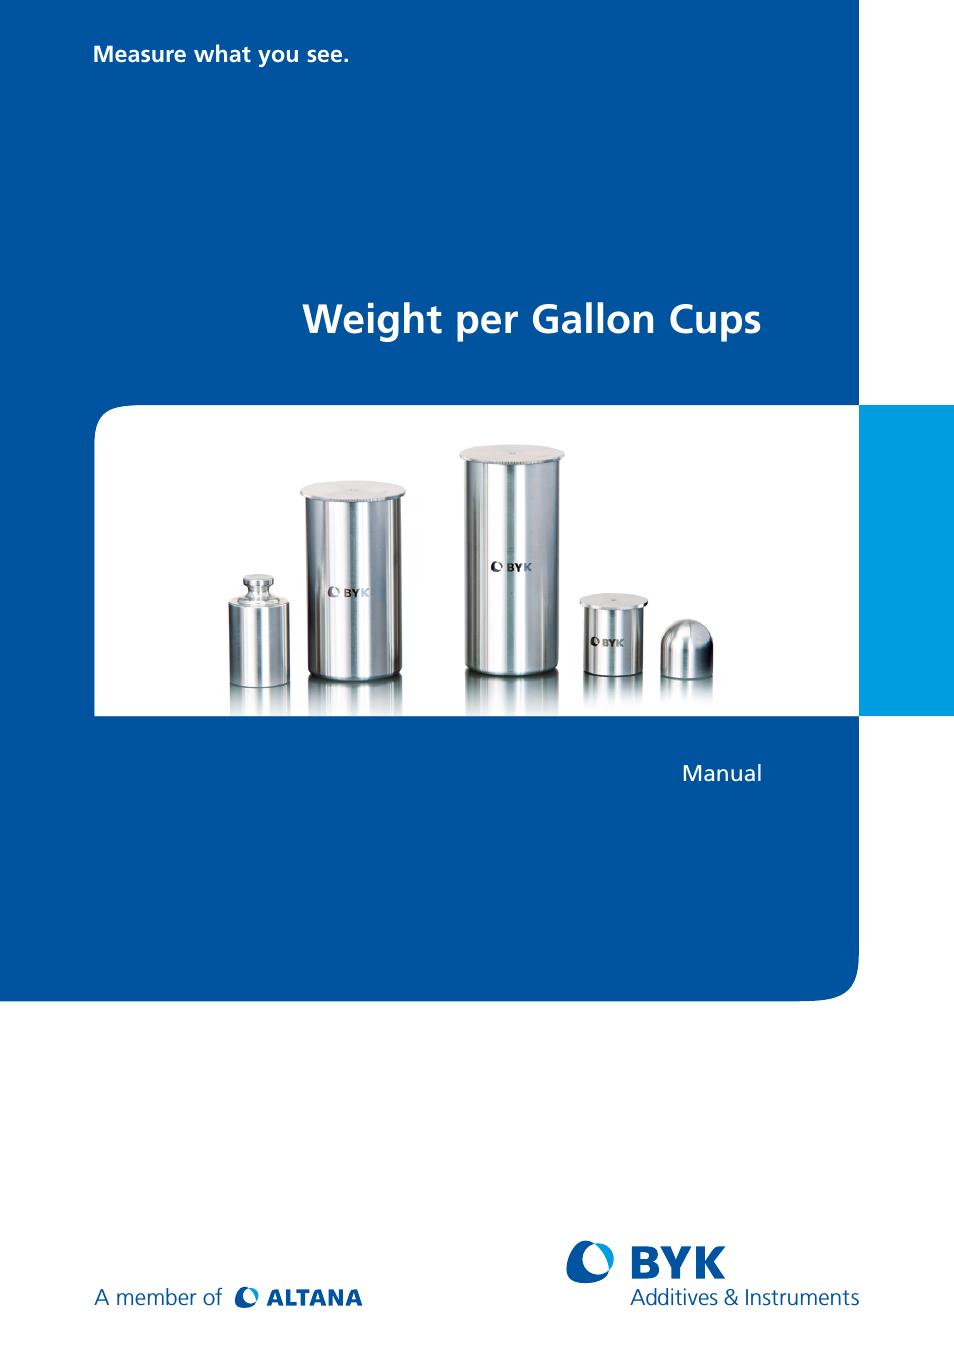 Weight per Gallon Cups